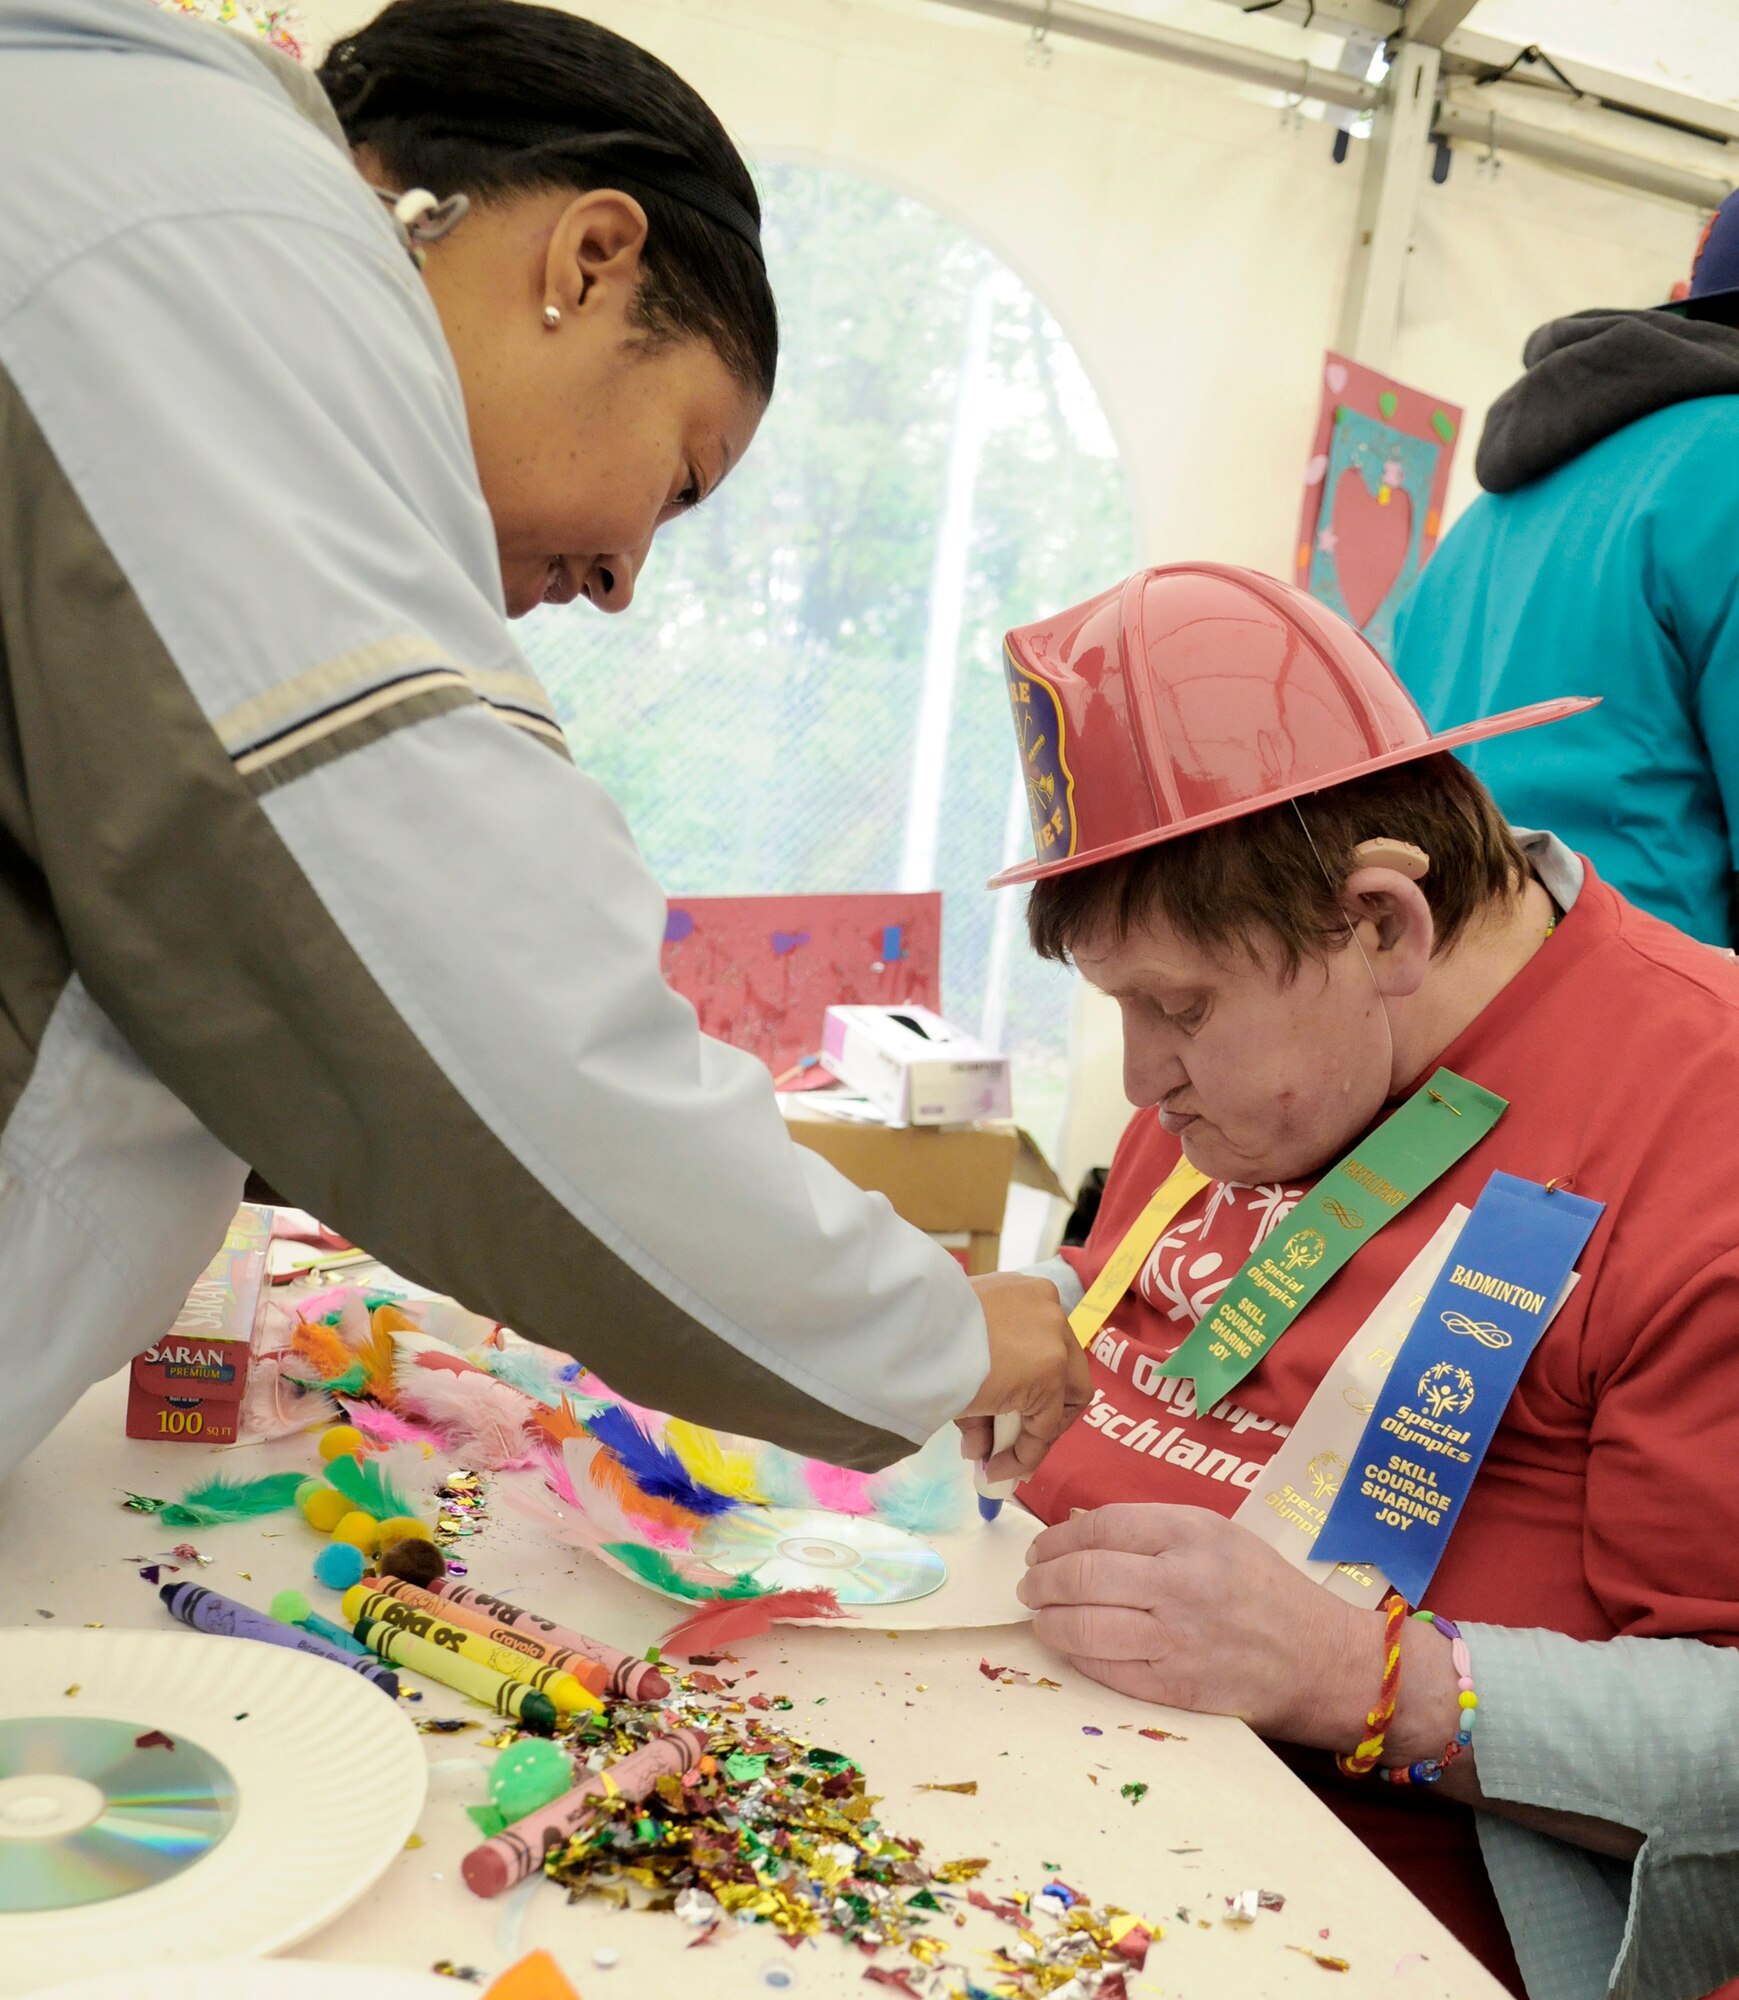 Tammie Honore assists an athlete in an arts and crafts section May 12, 2010, during the Special Olympics in Enkenbach-Alsenborn, Germany. The Special Olympics is a worldwide event for children and adults with disabilities to build confidence and foster friendship. The Kaiserslautern Military Community hosted its 27th Annual Special Olympics for more than 800 athletes. Ms. Honore is a Ramstein Middle School teacher.  (U.S. Air Force photo/Airman 1st Class Brittany Perry)